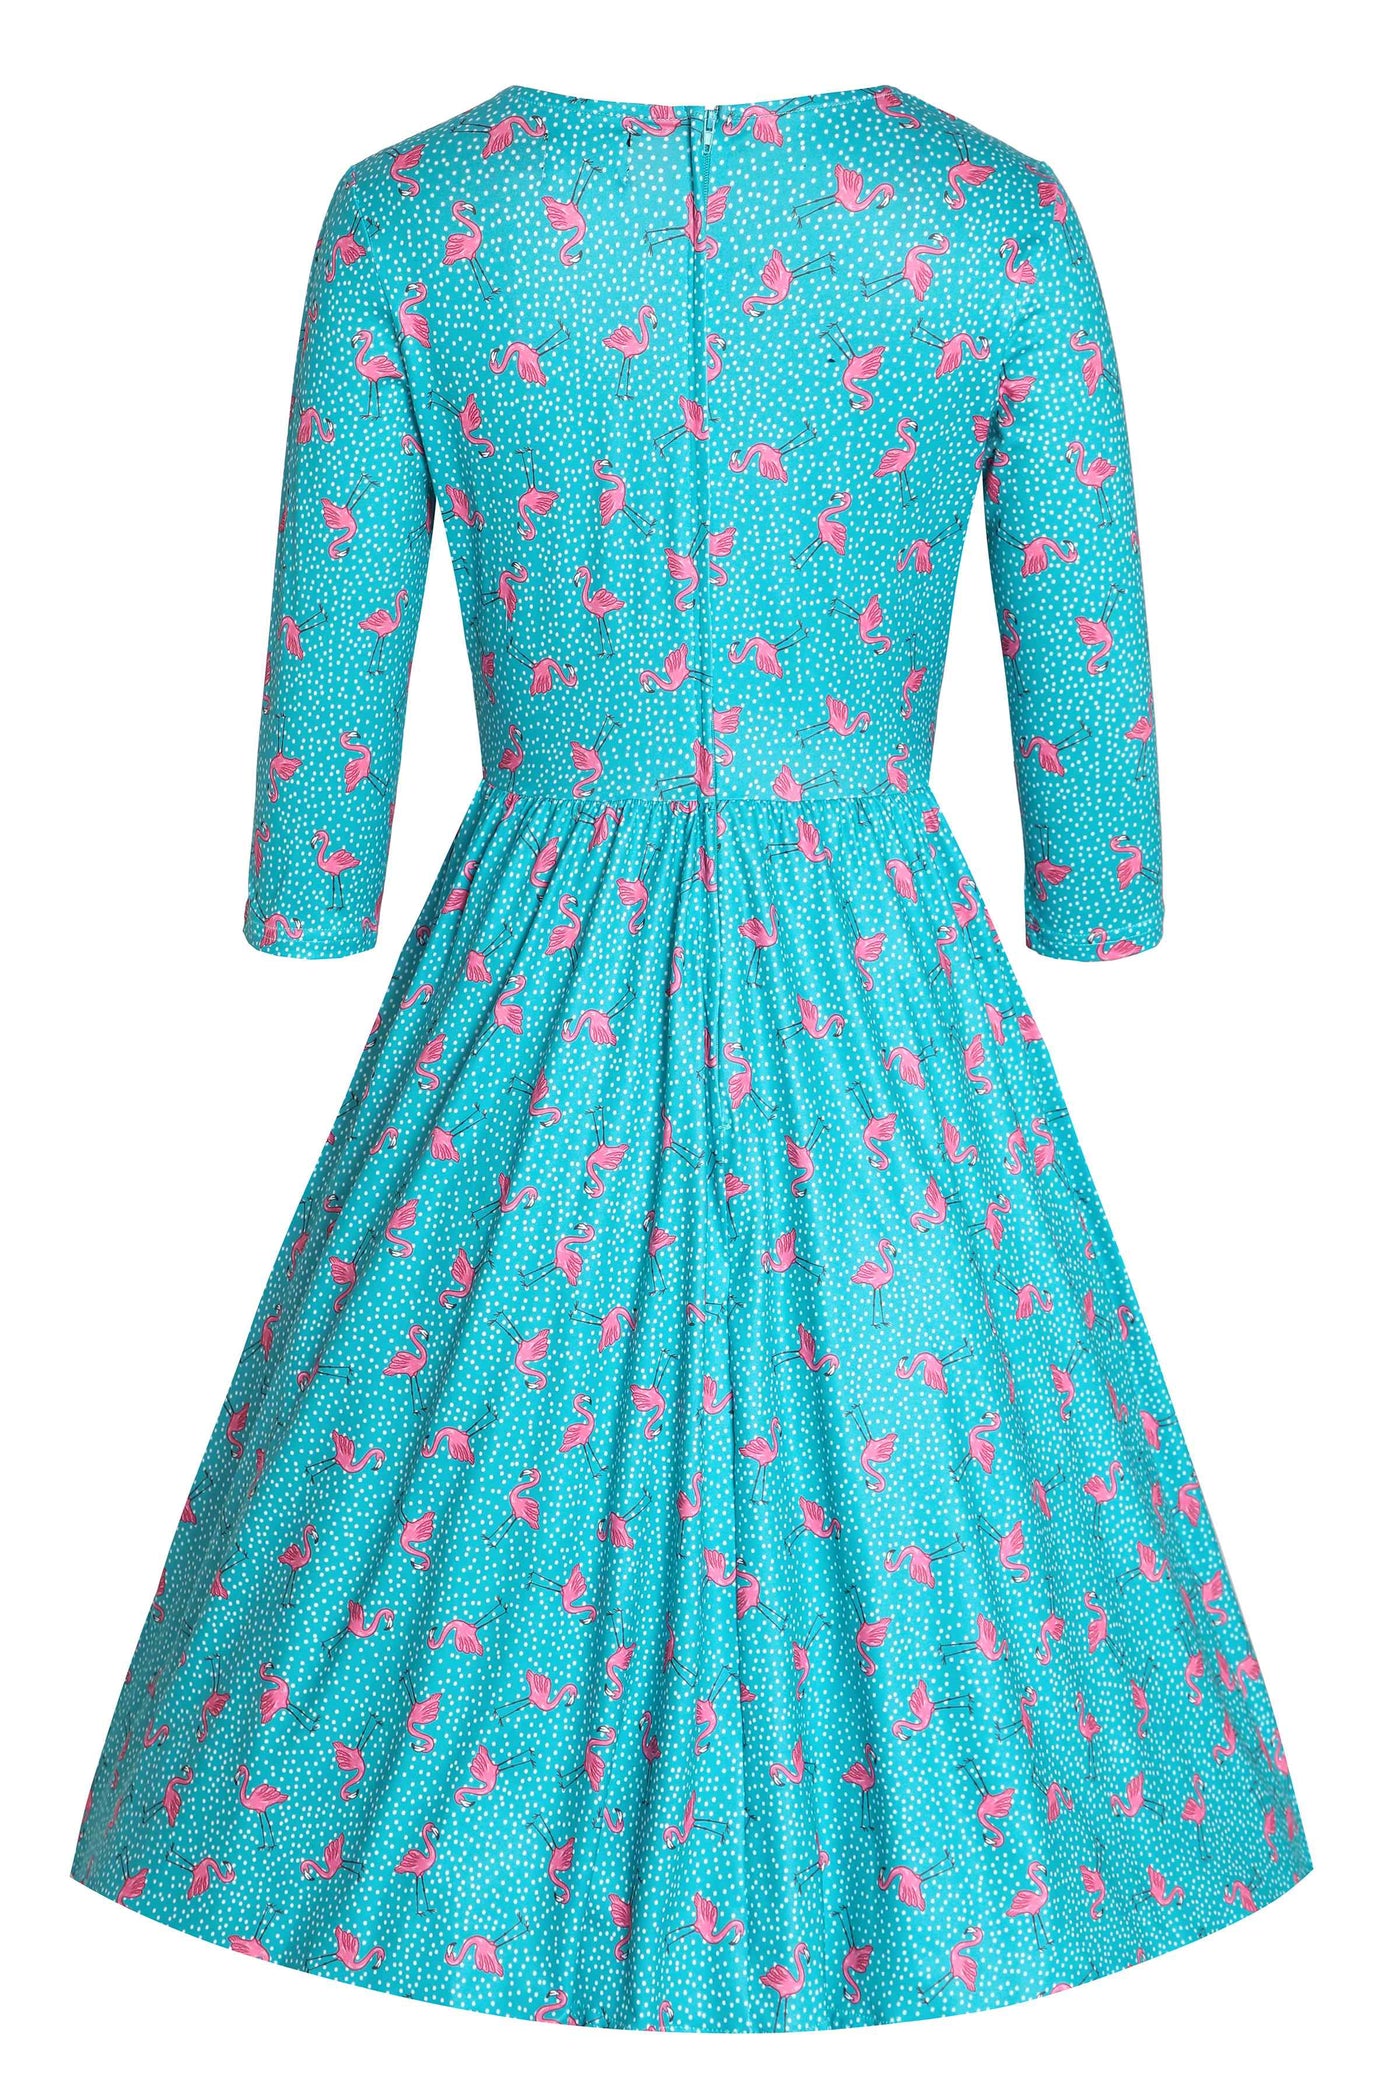 Back view of Flamingo Long Sleeved Dress in Green